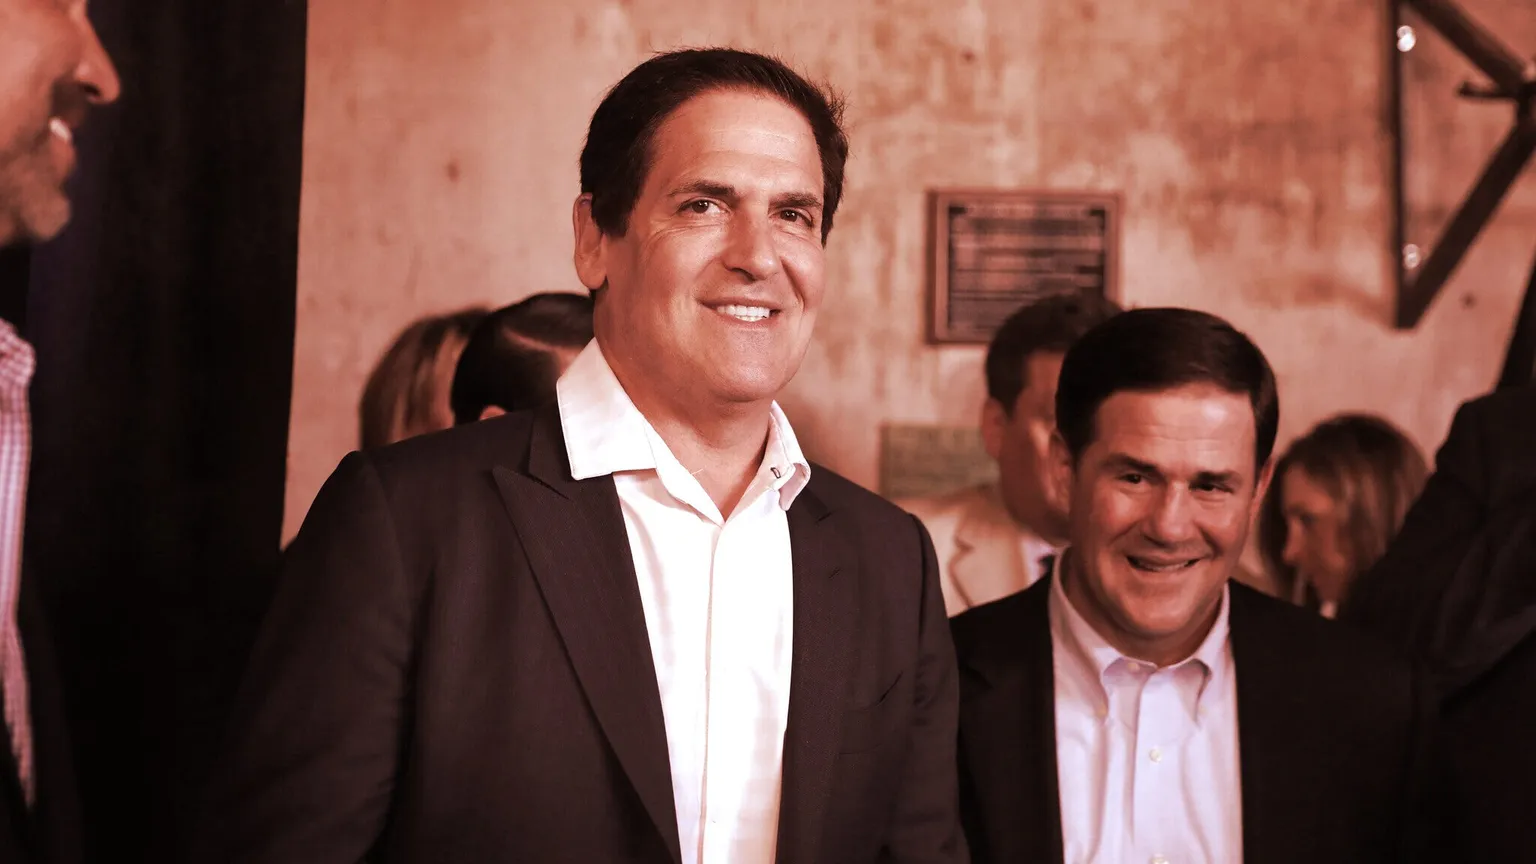 Mark Cuban with Arizon Governor Doug Ducey. Image: Gage Skidmore, Flickr (CC BY-SA 2.0)